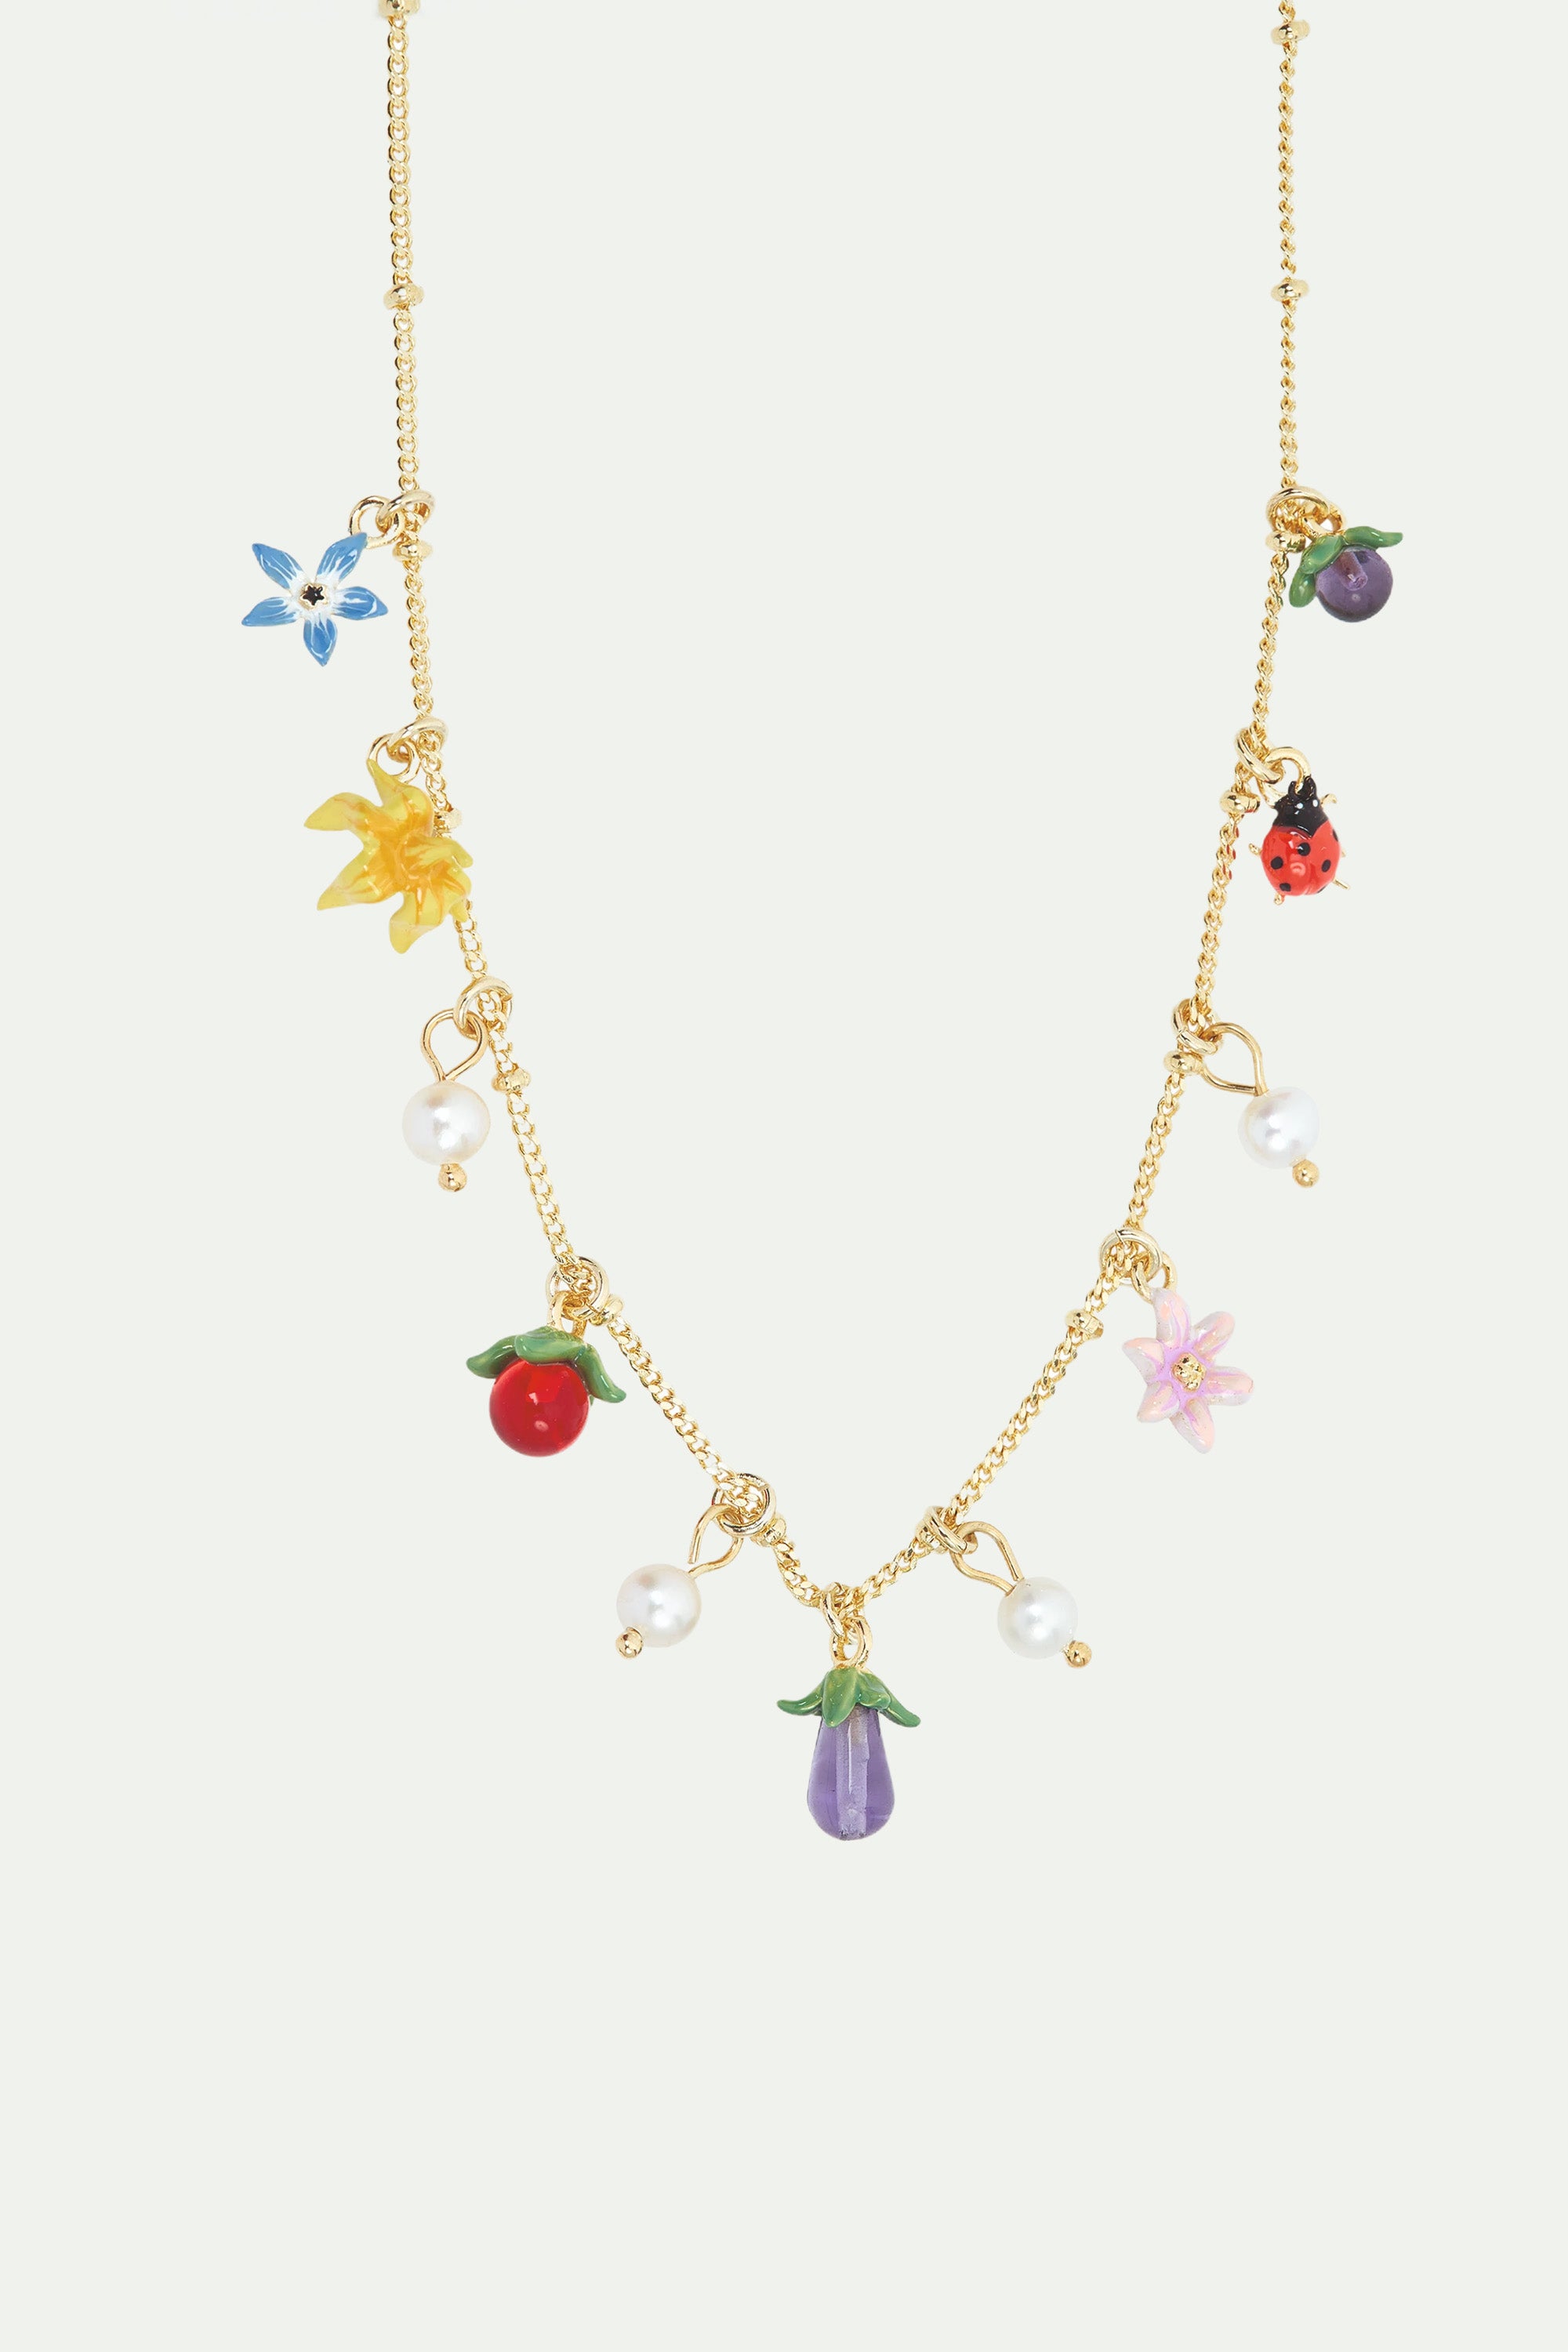 Wonderful vegetable garden and mother-of-pearl charm necklace